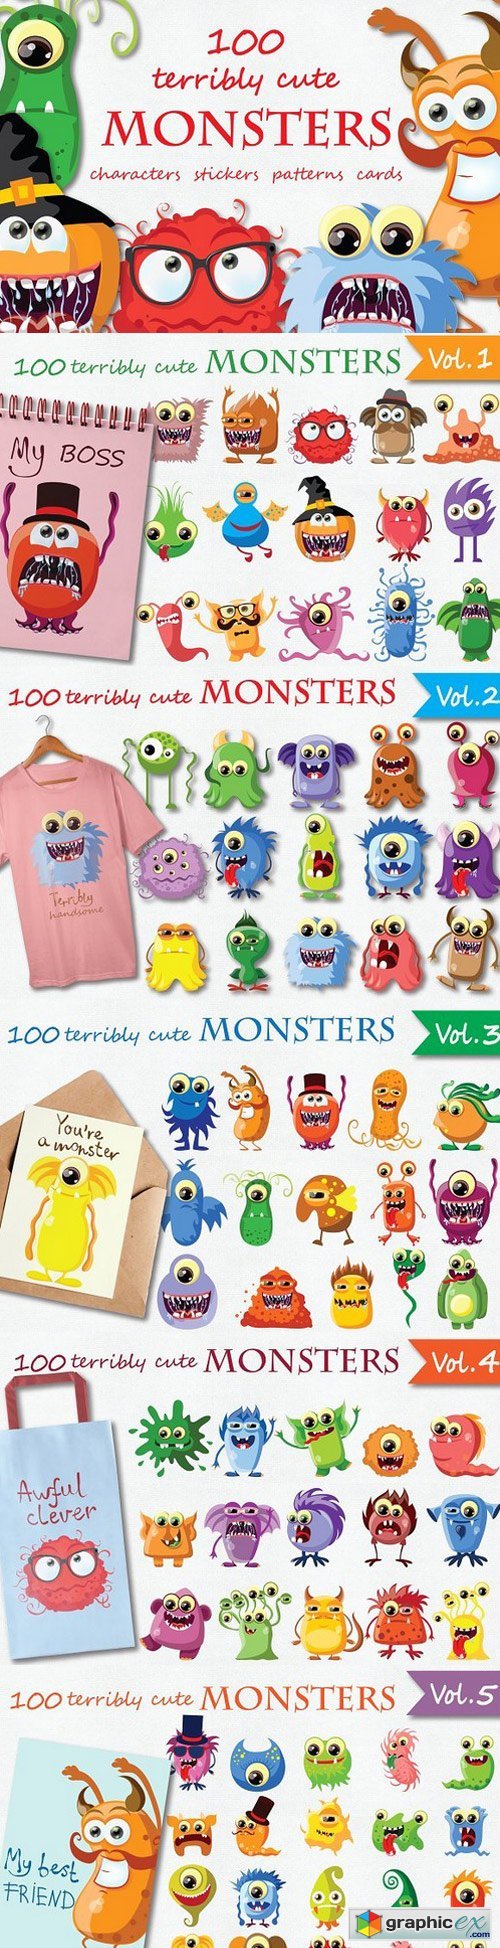 100 terribly cute MONSTERS